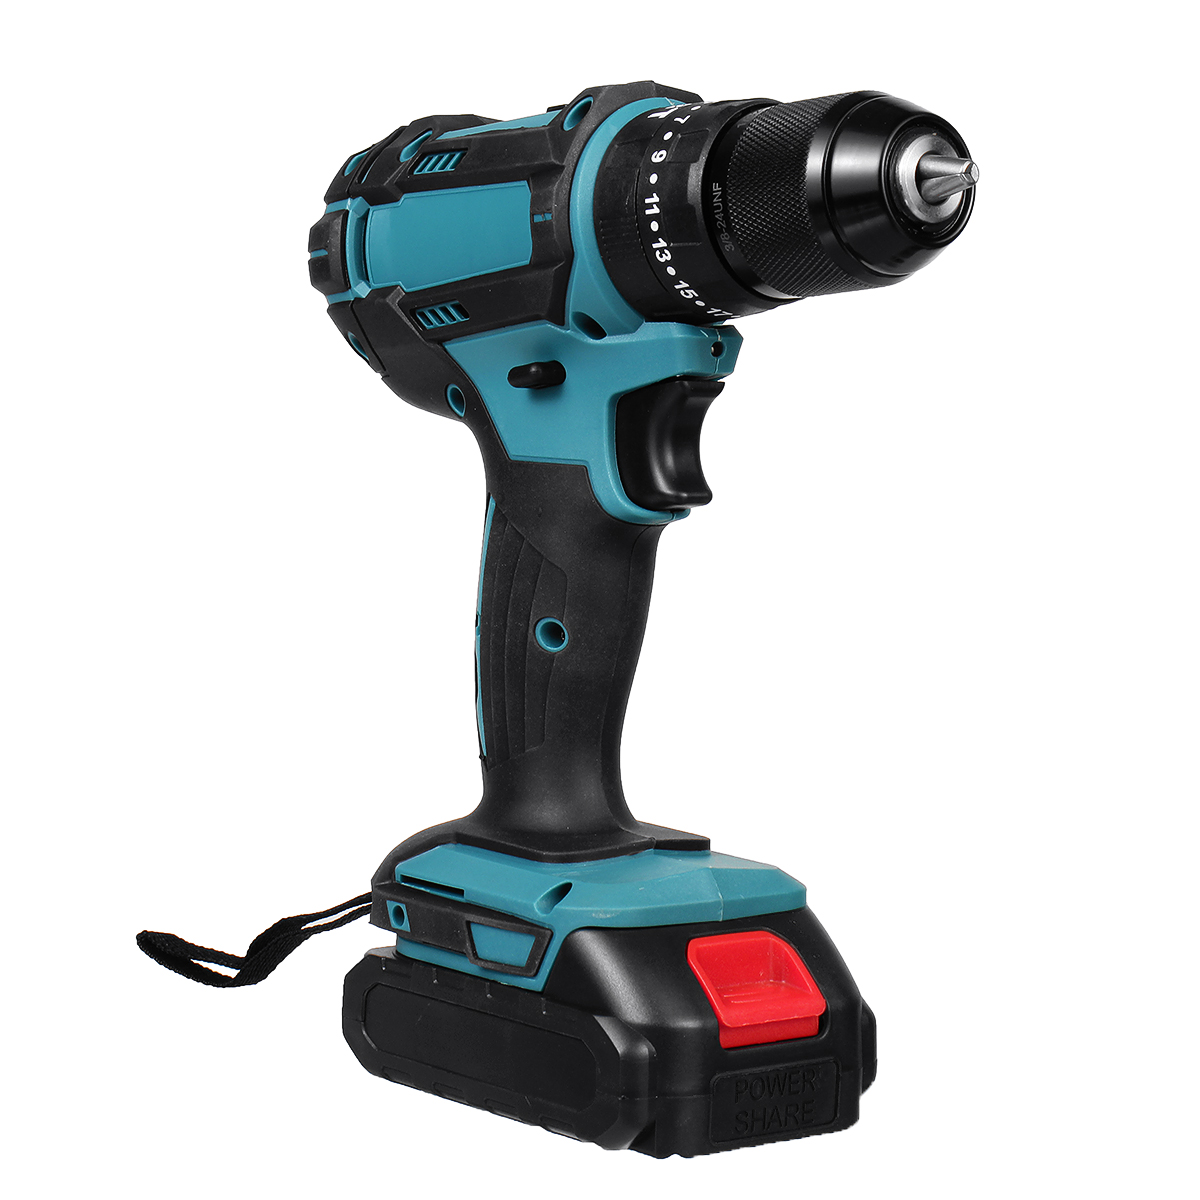 350Nm-4000-rpm-Electric-drill-3-In-1-Hammer-Flat-Drill-Screwdriver-Churn-Drill-with-Battery-1955074-17